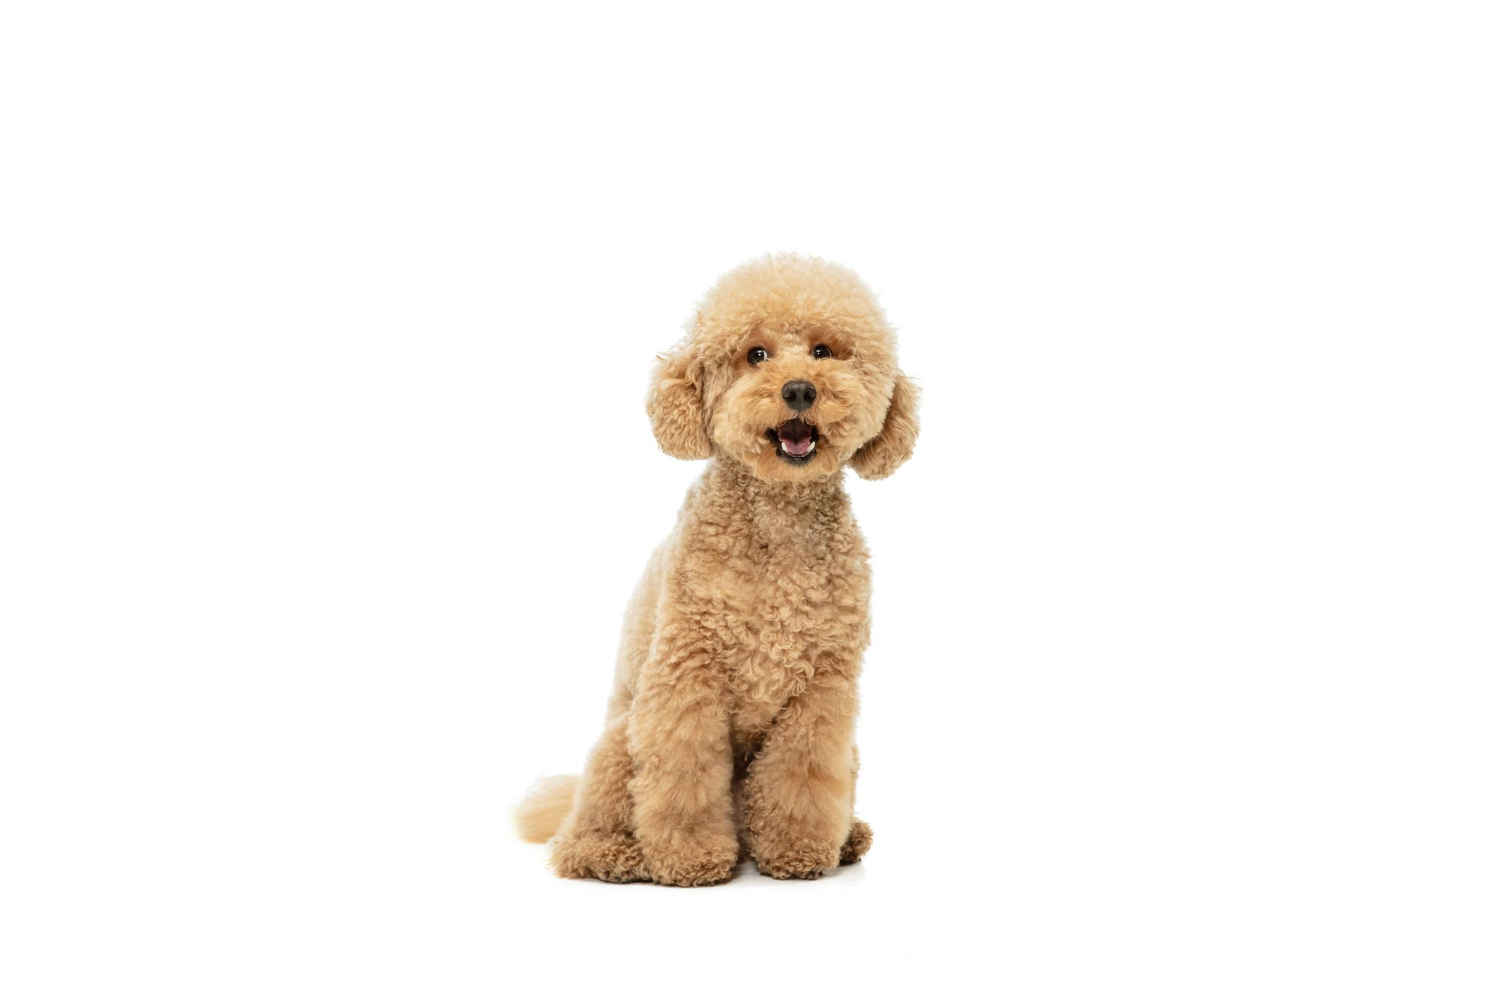 How did you introduce your Poodle puppy to different environments and noises?